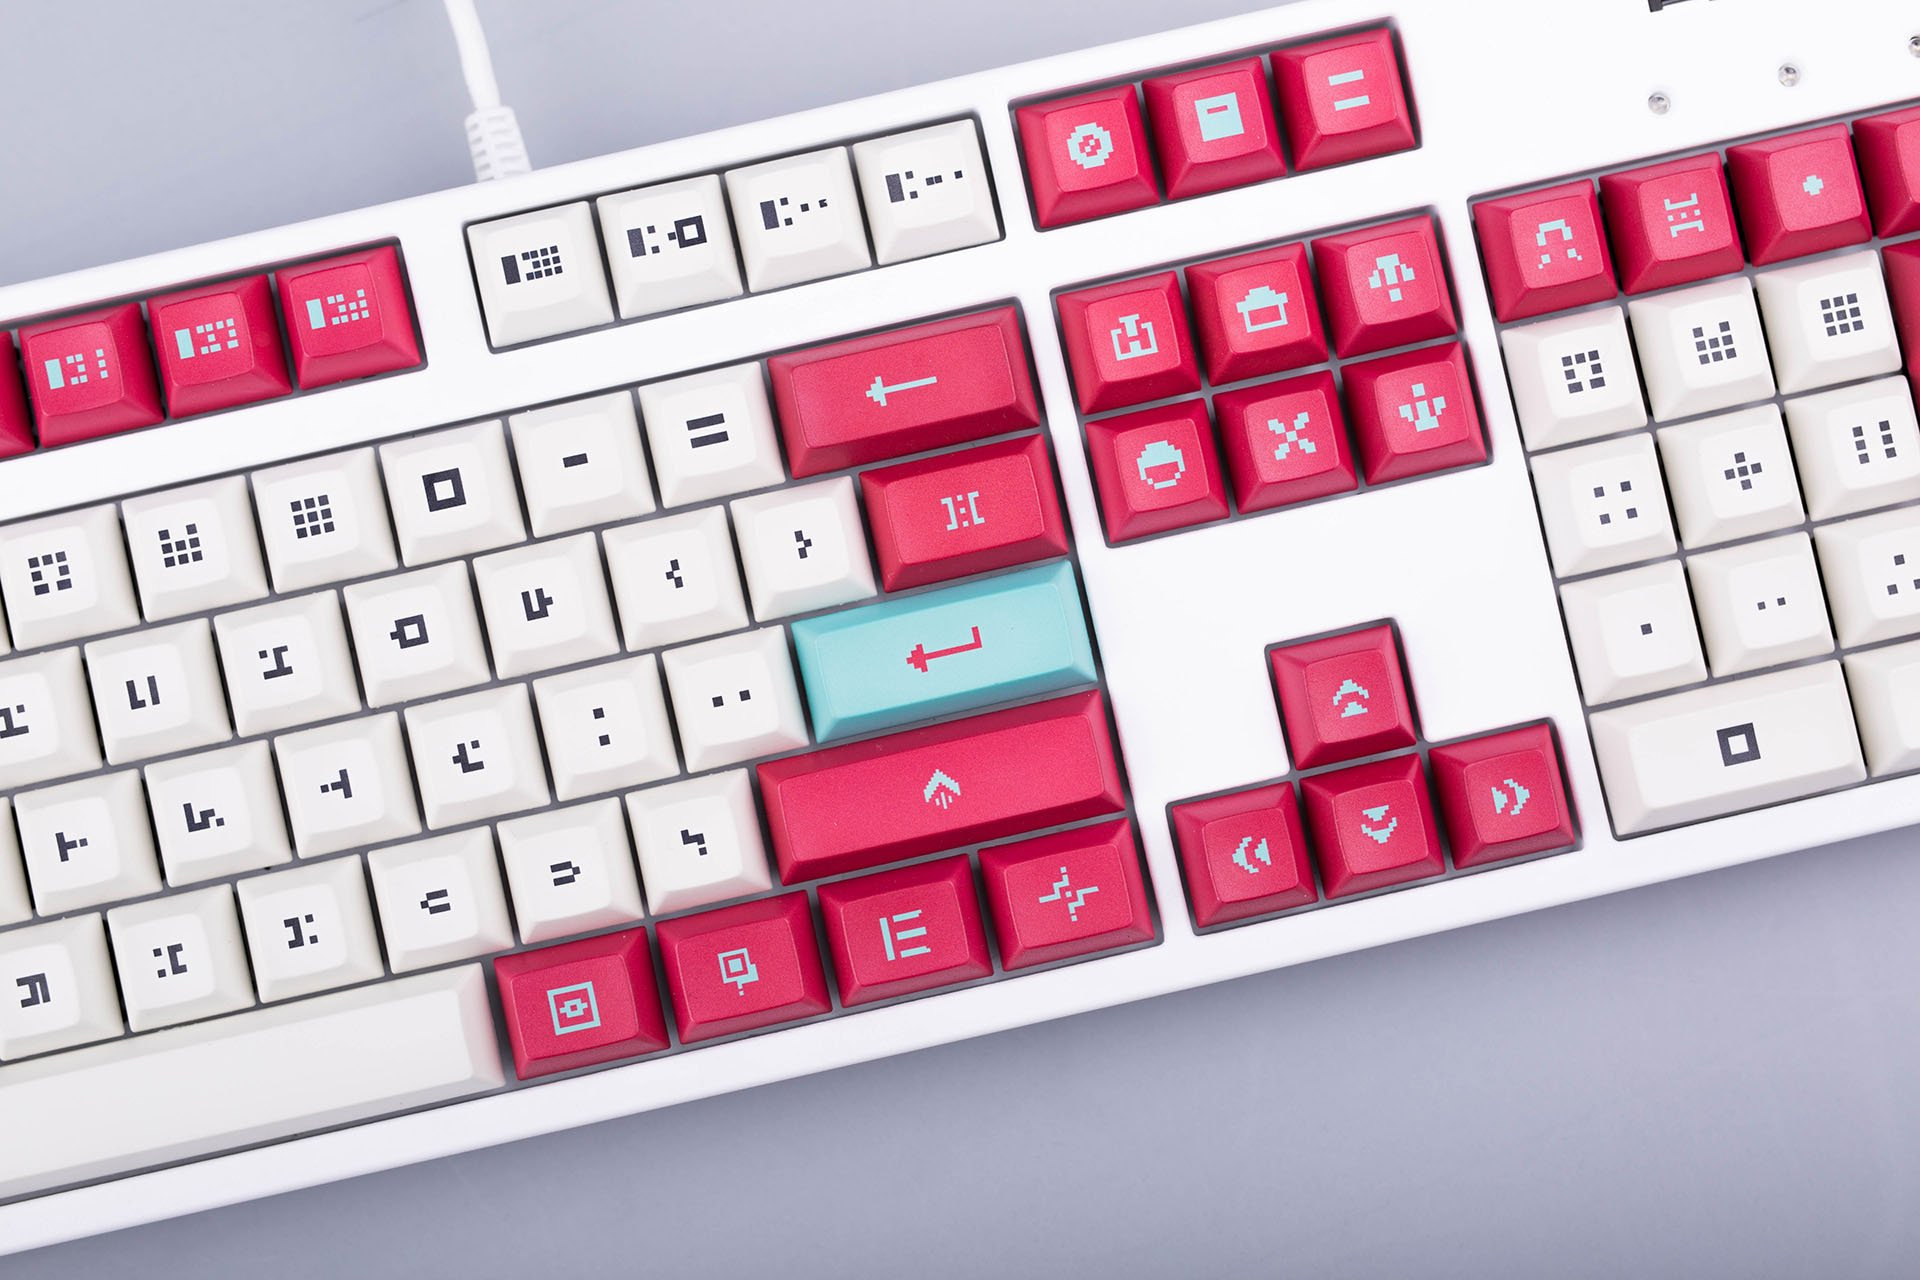 Hyper Light Drifter Keycap Set Shouldn’t Be Too Hard To Type On